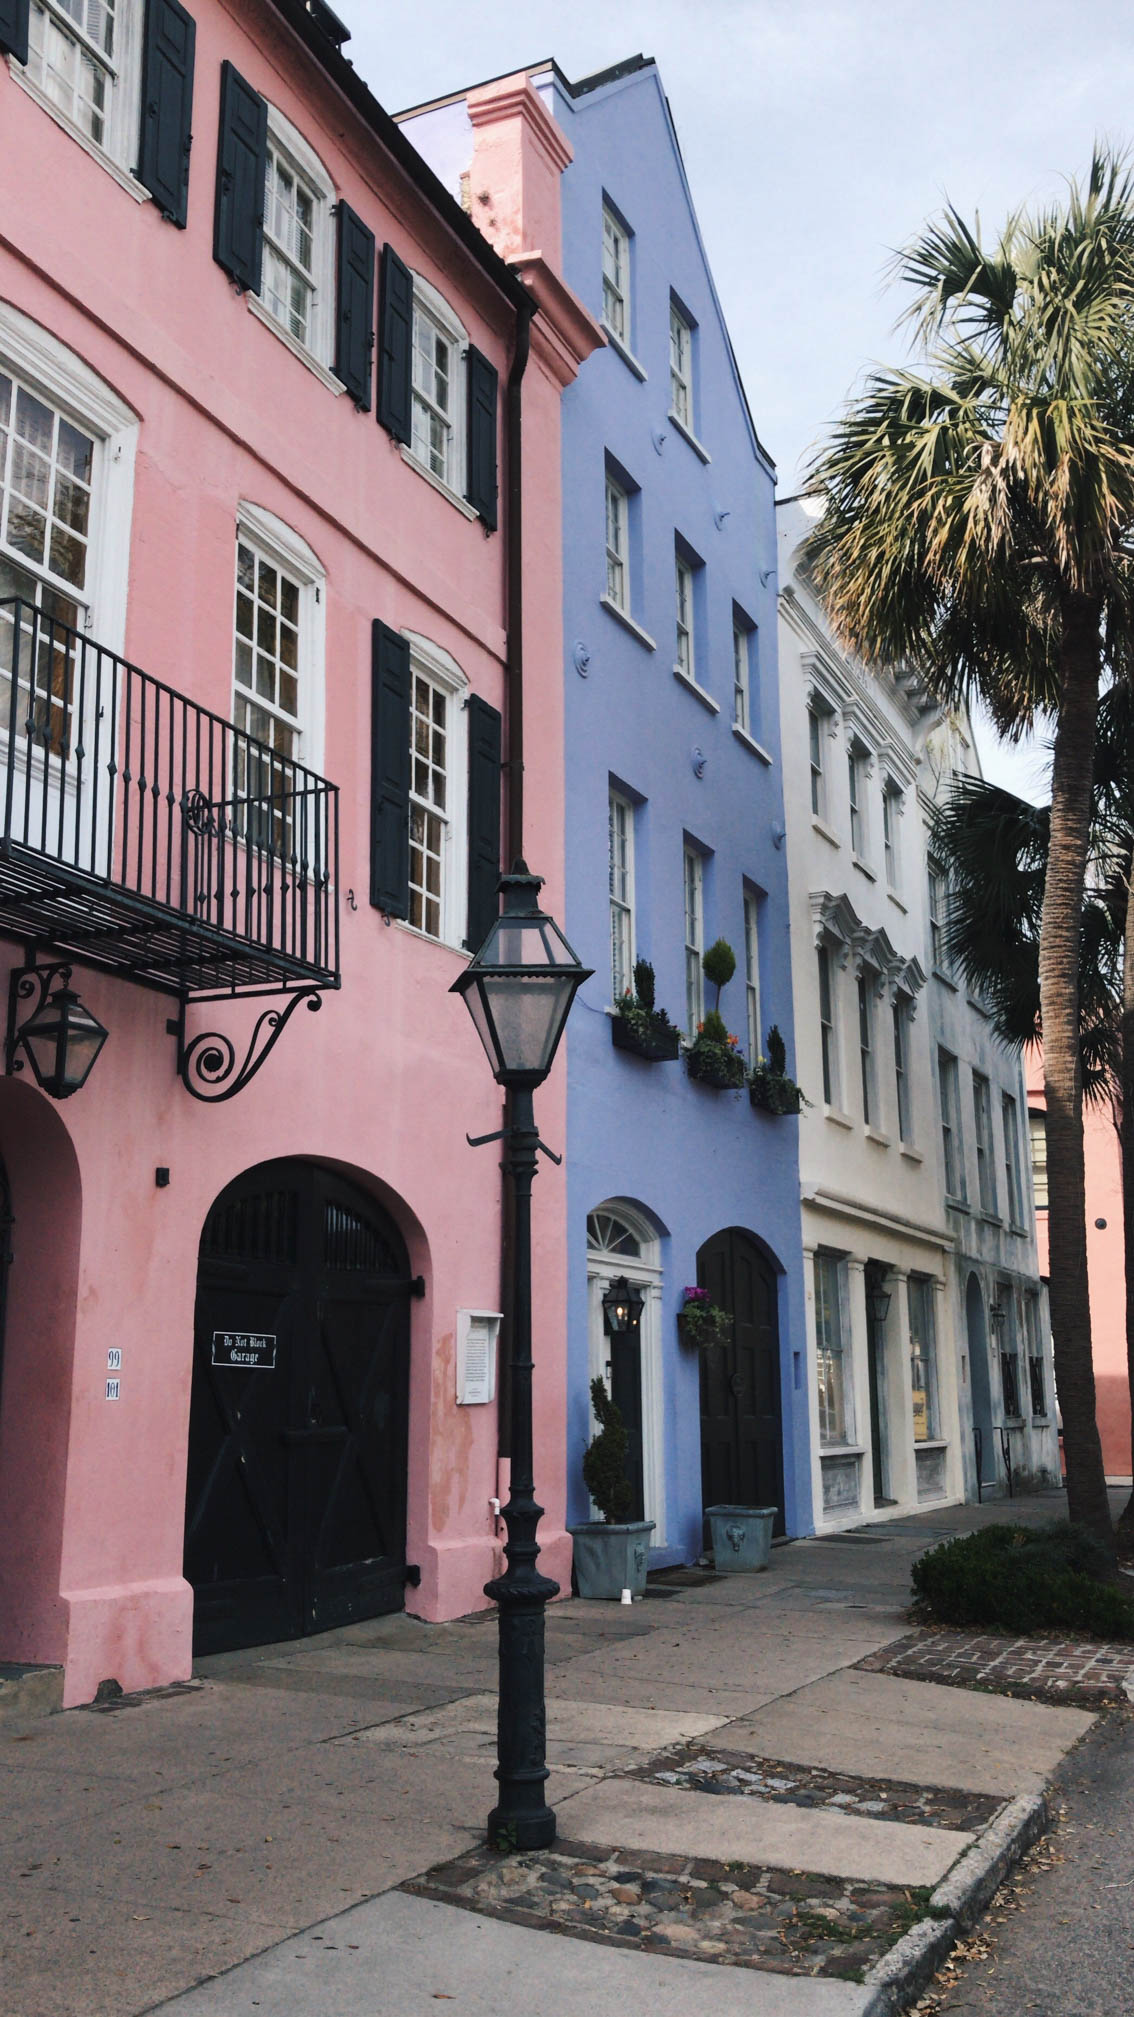 A First-Timer's Guide to Visiting Charleston, South Carolina: Best restaurants and bars, things to do, places to see during a long weekend trip to Charleston